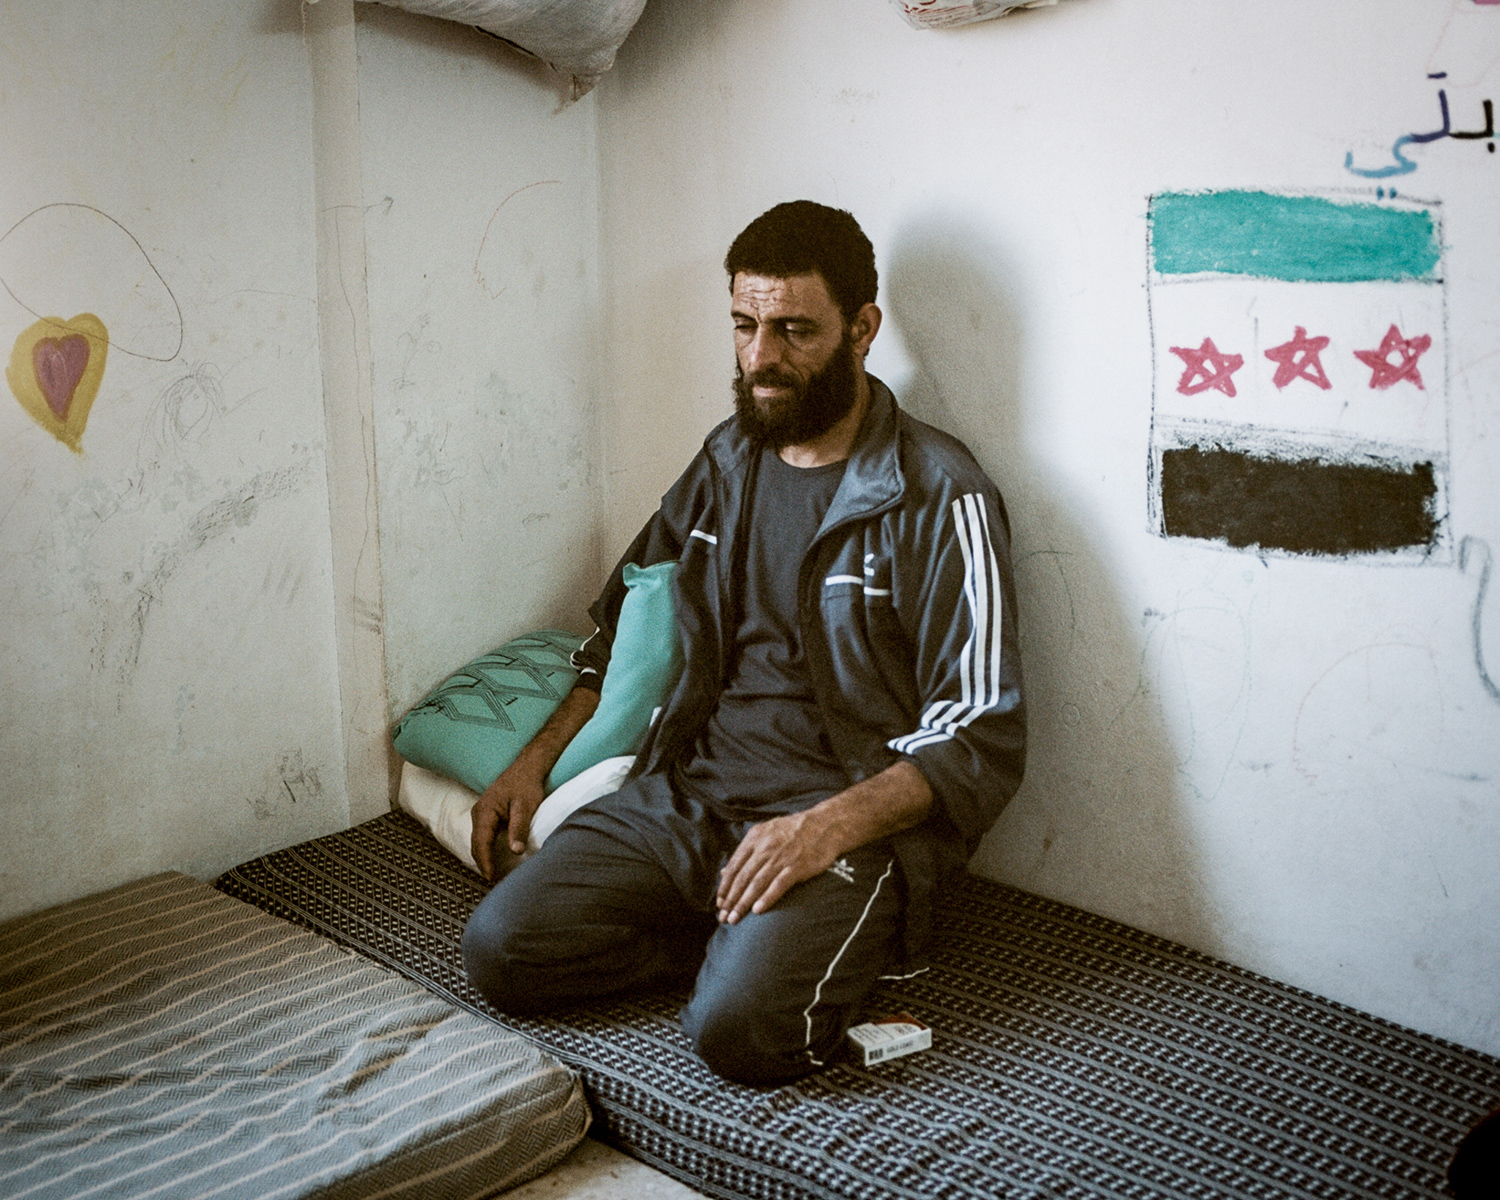 Hamad sits near a hand painted Free Syrian Army flag in his home in the Cyber City refugee camp near Irbid, Jordan.